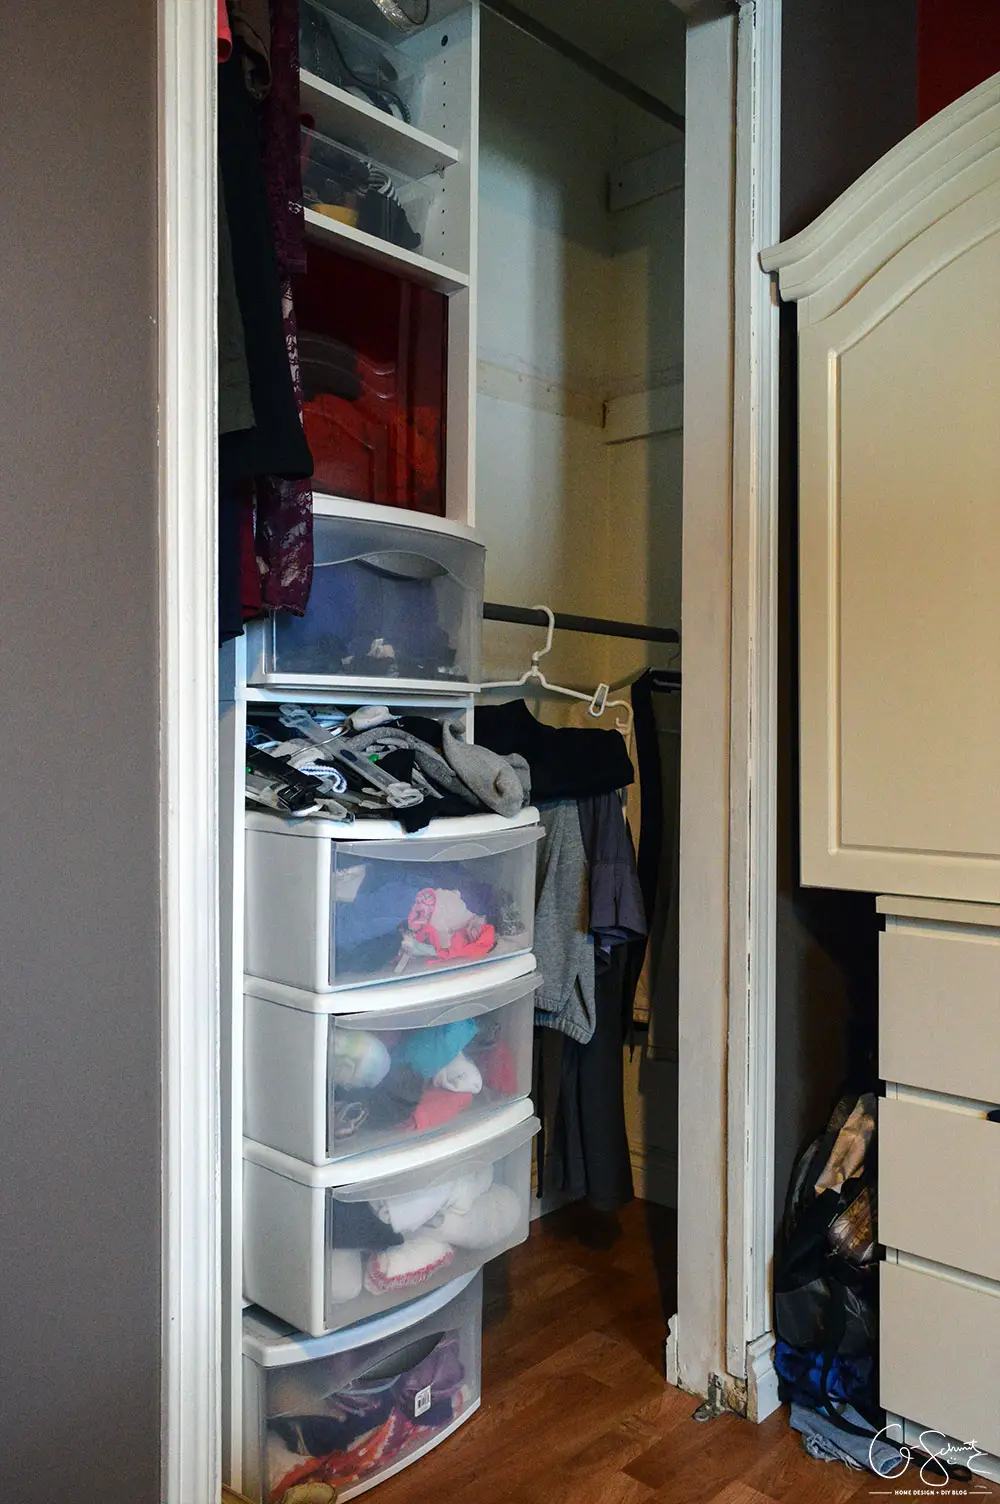 Renovating a master closet is a great way to get your creative juices flowing. Not having to tackle plumbing and electrical OR having to deal with structural walls makes this an easy DIY project!